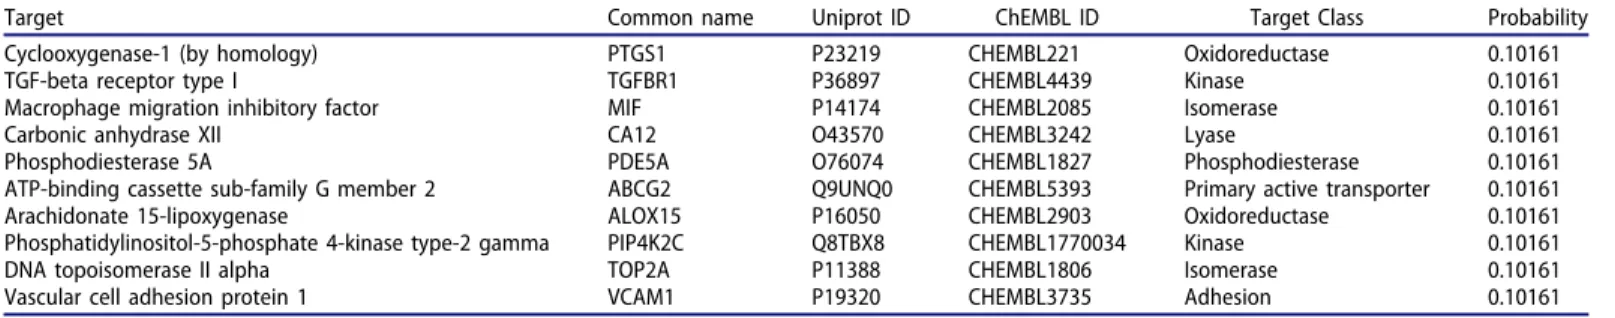 Table 6. Protein target prediction for compound 40.